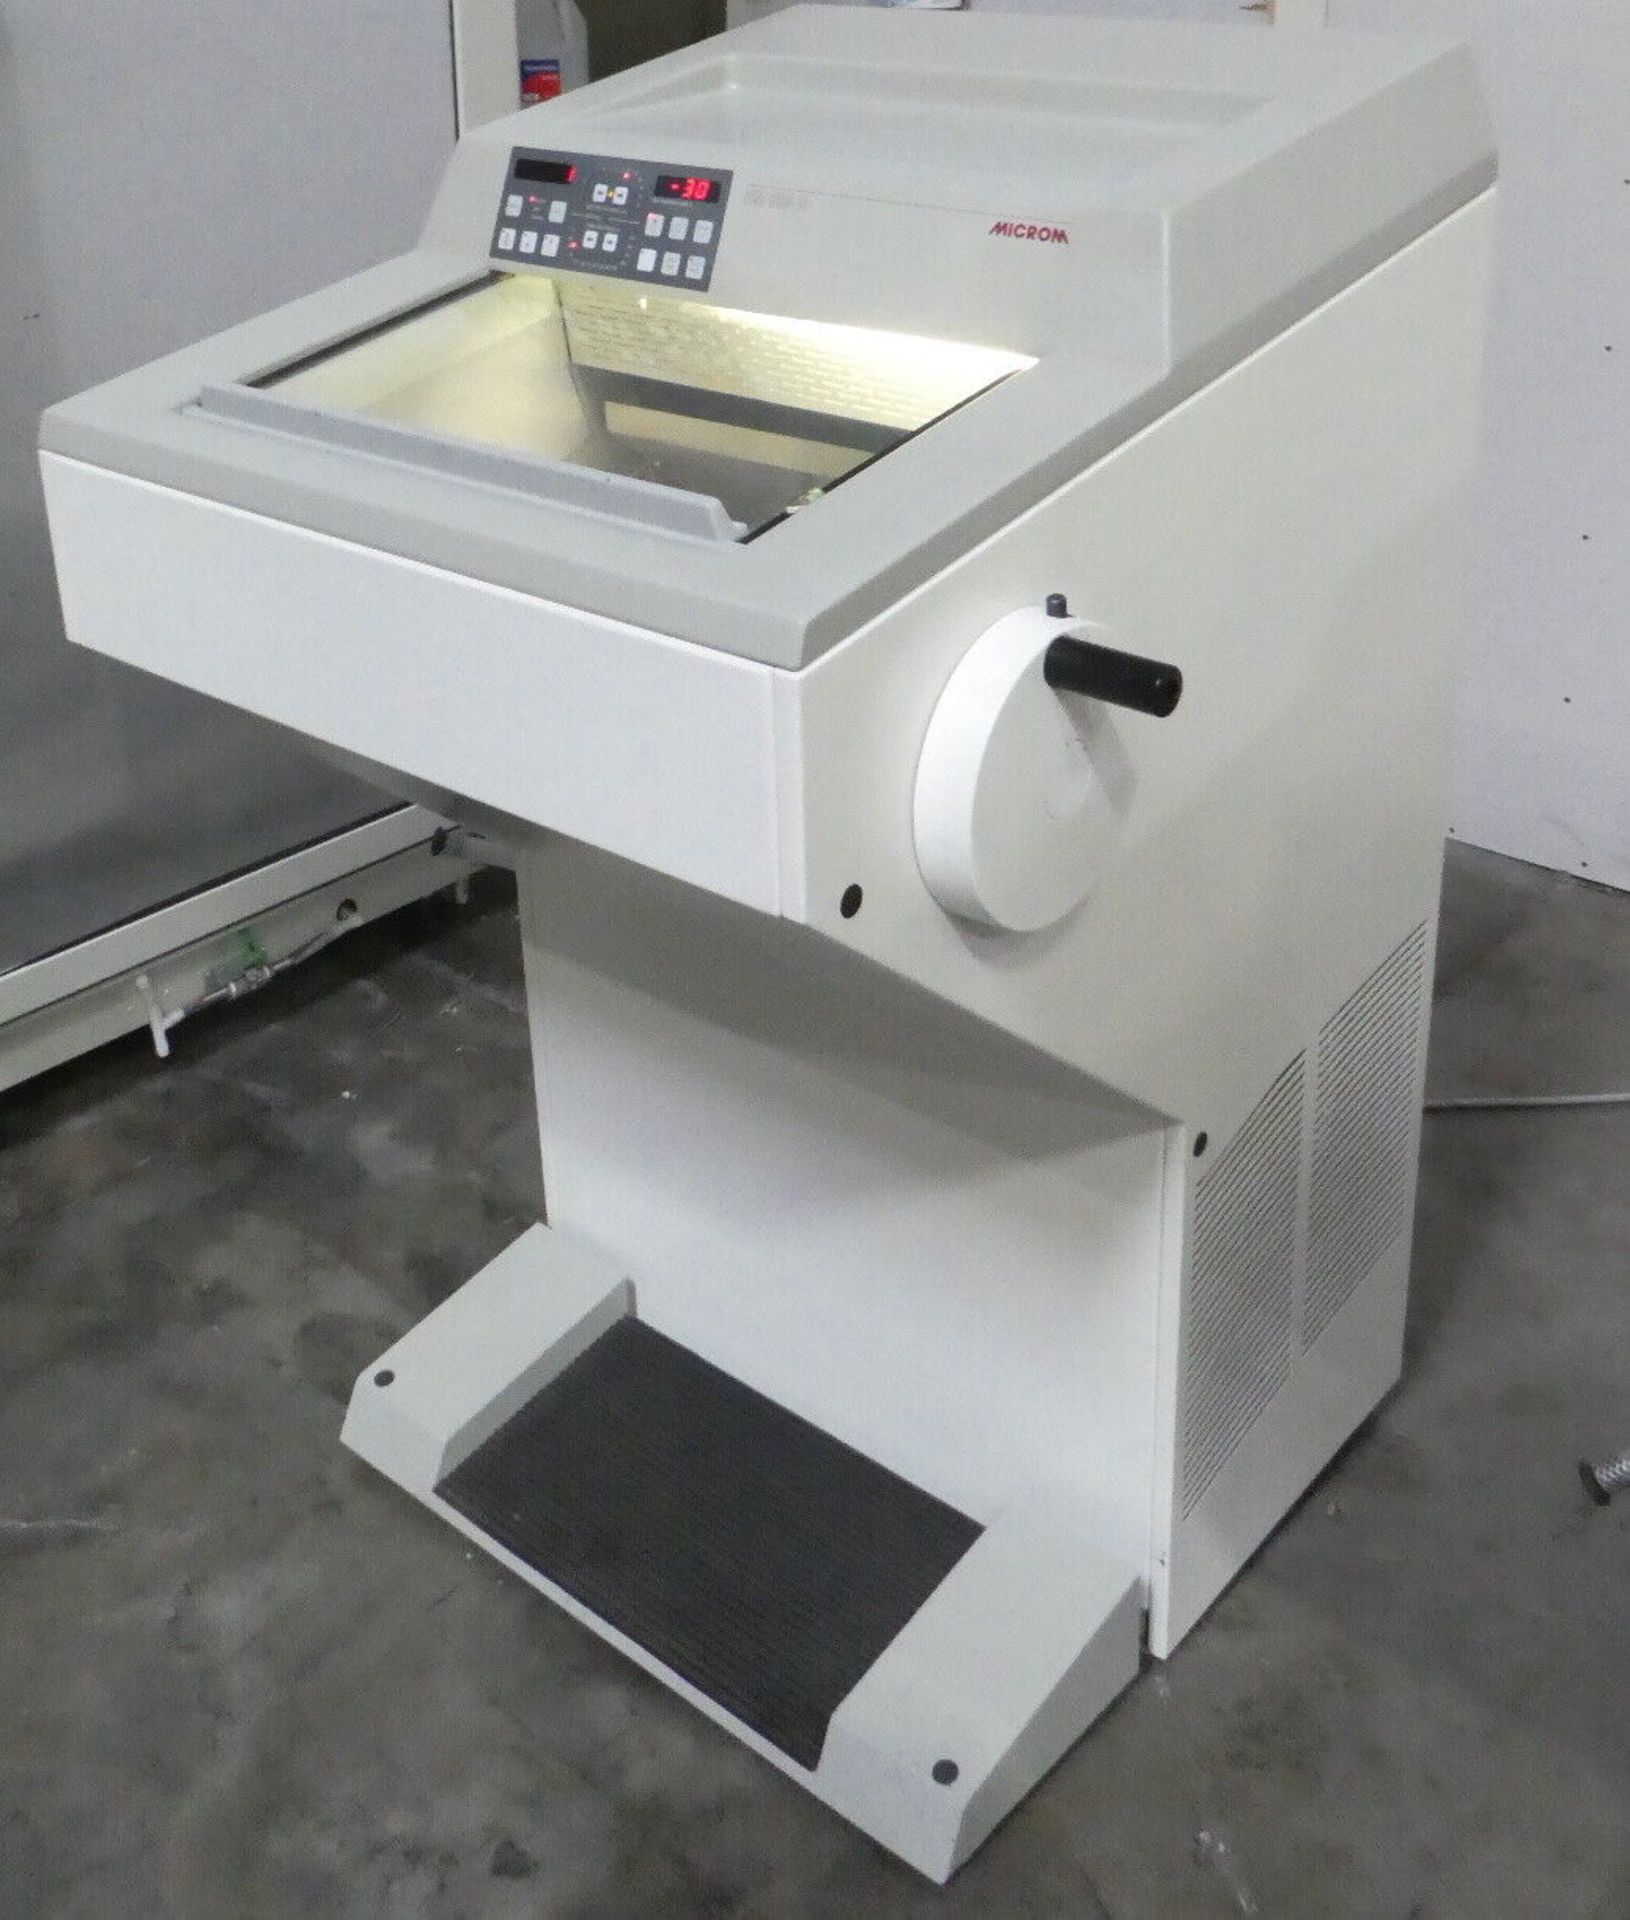 MICROM HM 505 EP Universal Cryostat Microtome. Thermometer not included. - Image 2 of 11